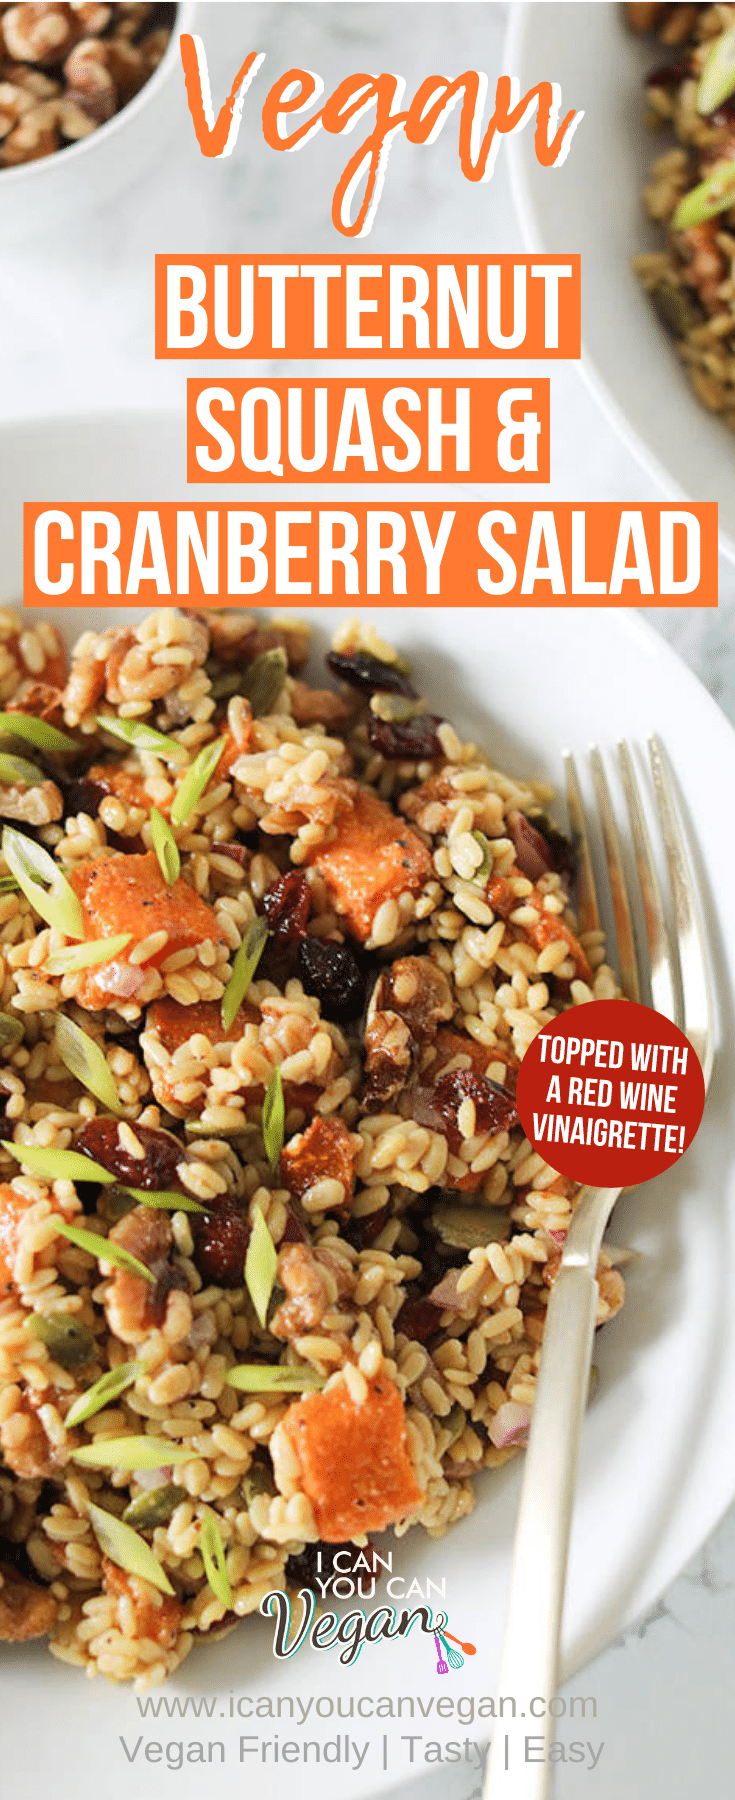 Roasted Butternut Squash and Cranberry Salad Pinterest